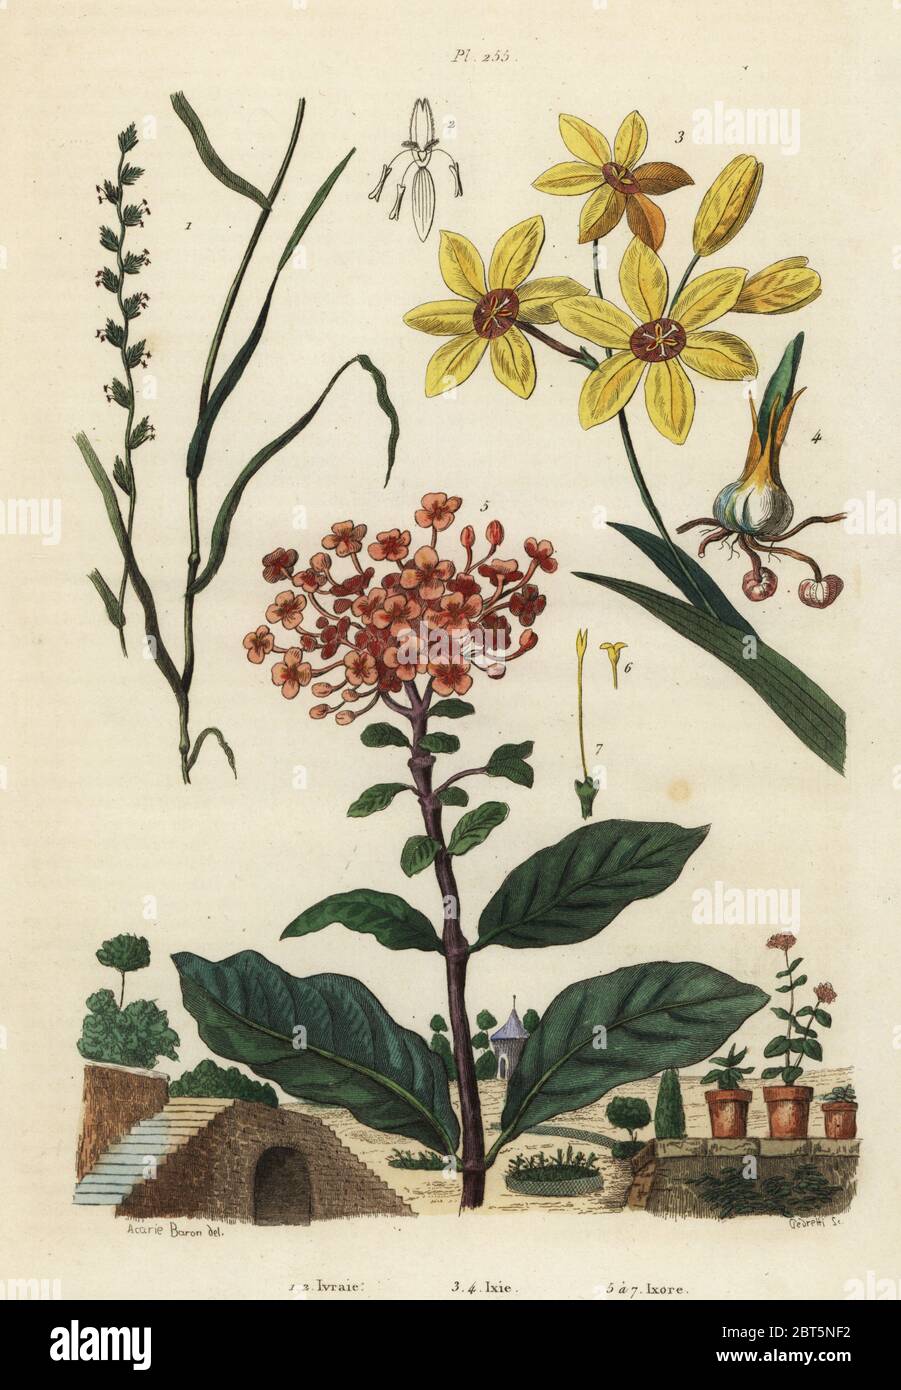 Perennial rye grass, Lolium perenne 1,2, spotted African corn lily, Ixia maculata var. fuscocitrina 3,4 and jungle geranium, Ixora coccinea 5-7. Ivraie, Ixie, Ixore. Handcoloured steel engraving by Pedretti after an illustration by A. Carie Baron from Felix-Edouard Guerin-Meneville's Dictionnaire Pittoresque d'Histoire Naturelle (Picturesque Dictionary of Natural History), Paris, 1834-39. Stock Photo